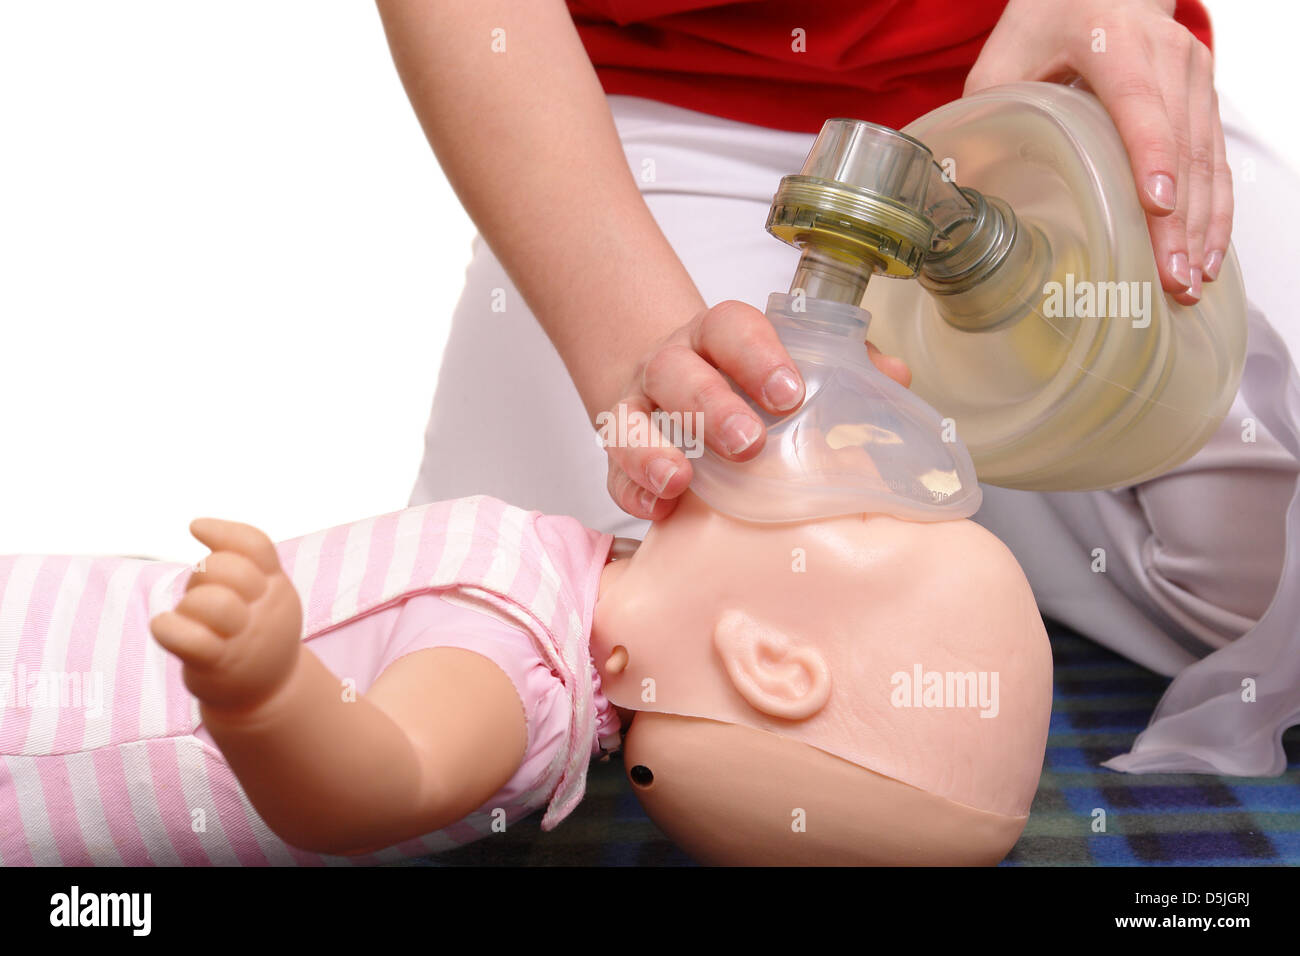 First aid instructor demonstrating artificial respiration using respirator on infant phantom Stock Photo